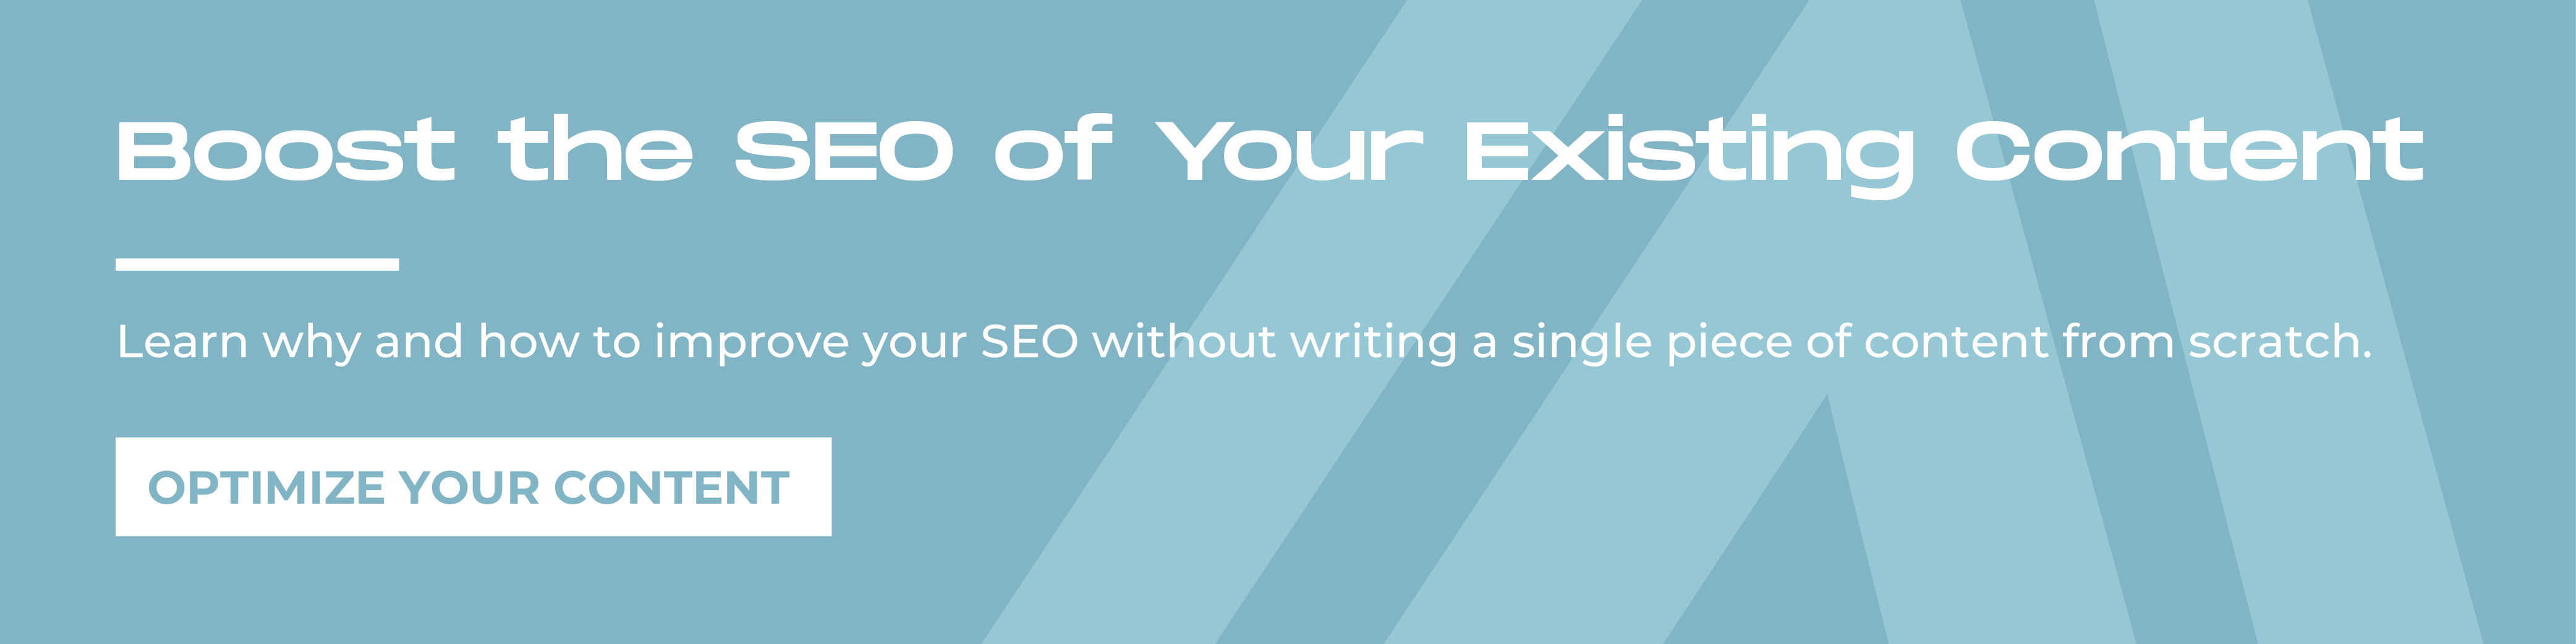 Boost the SEO of Your Existing Content